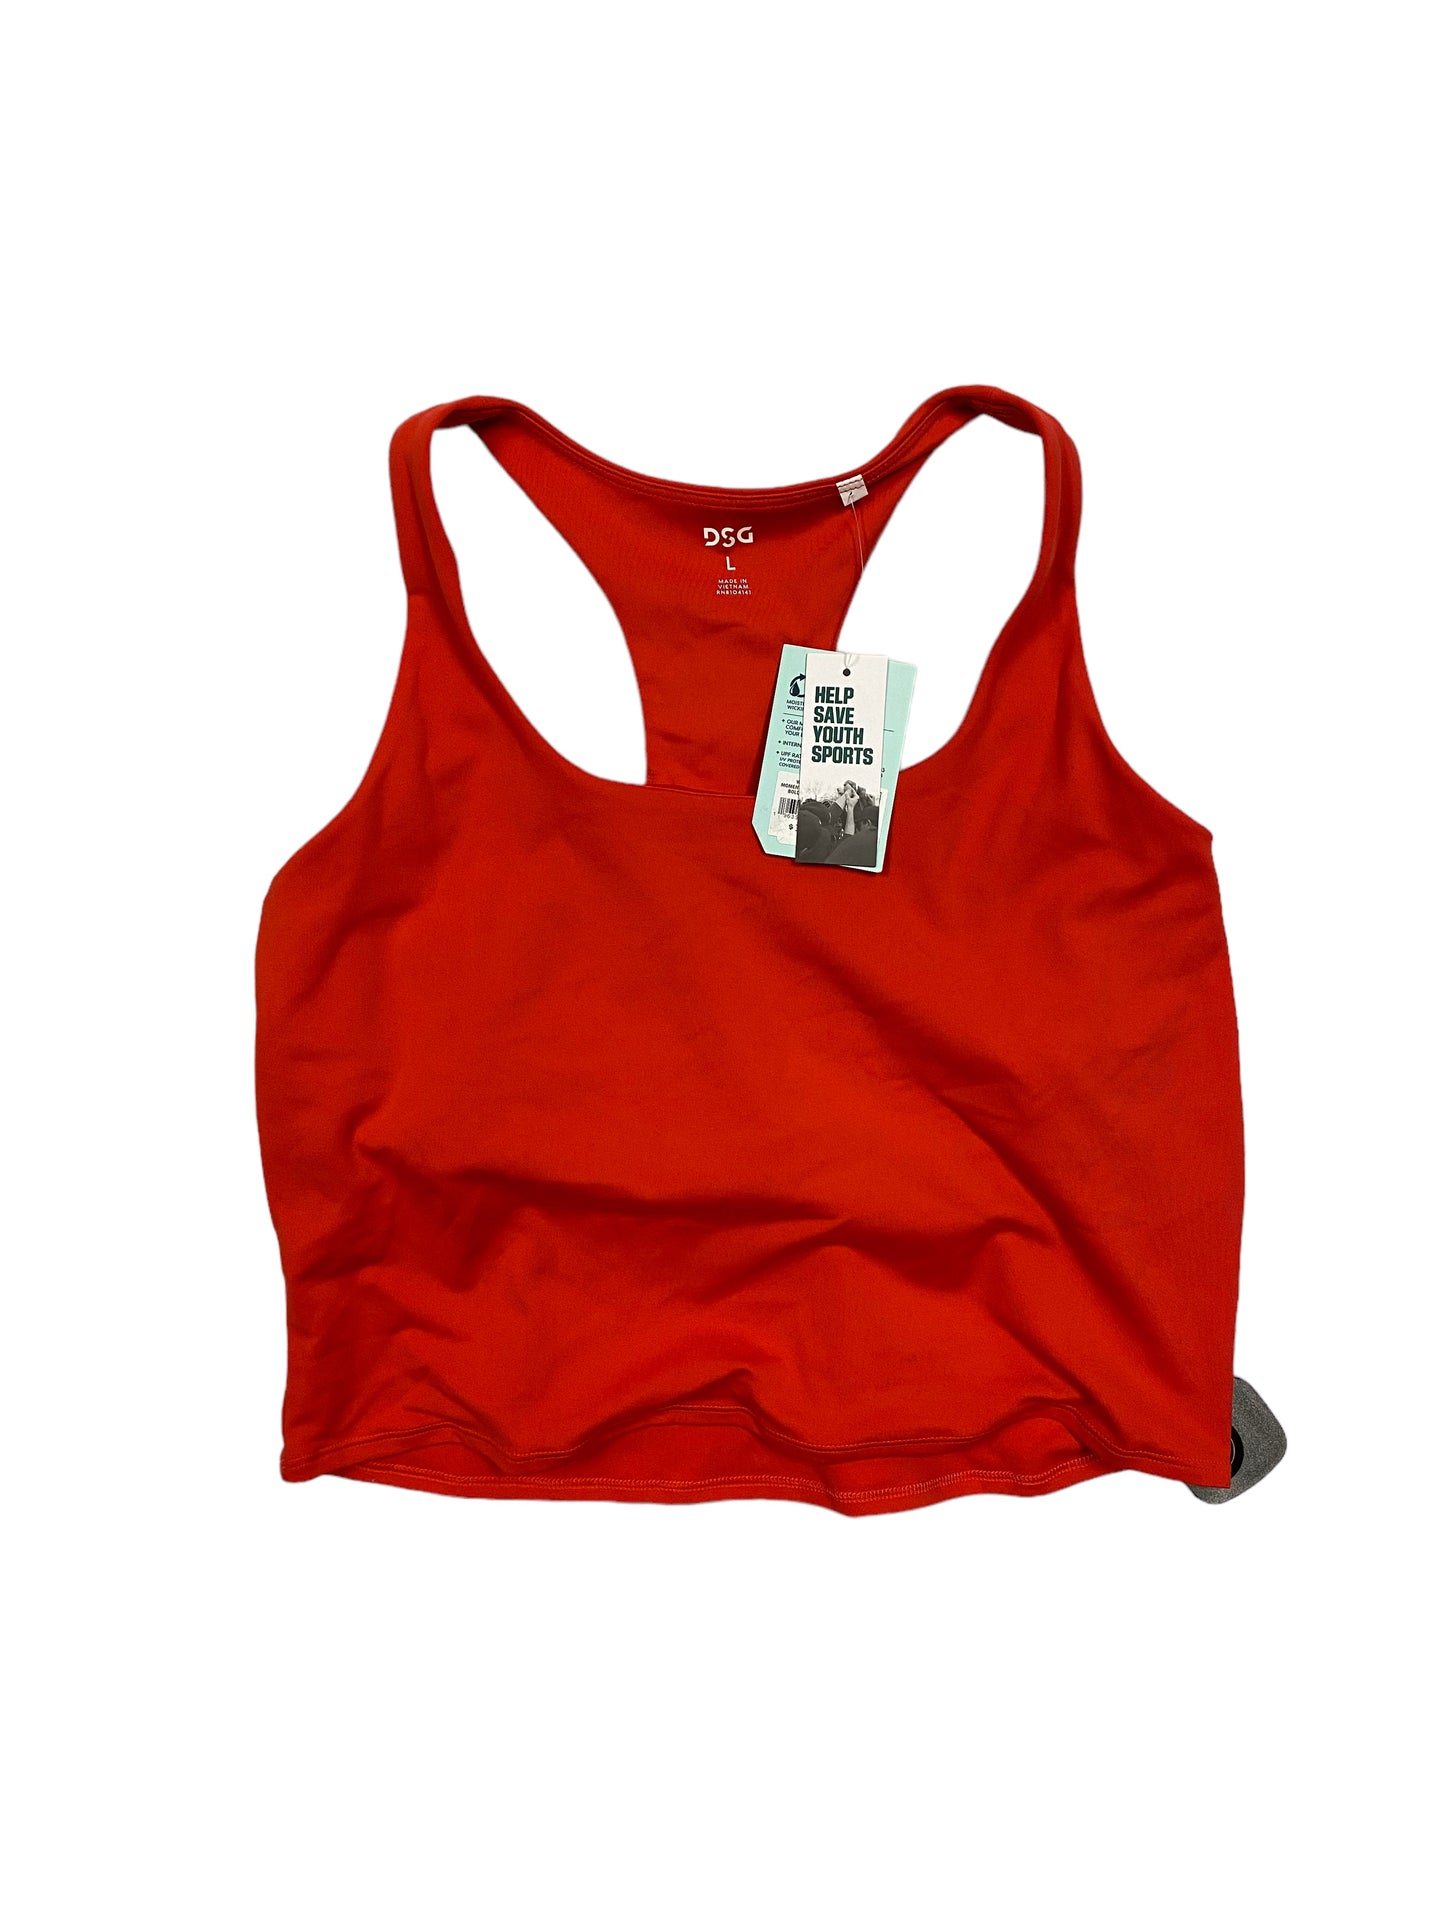 Red Athletic Tank Top Dsg Outerwear, Size L